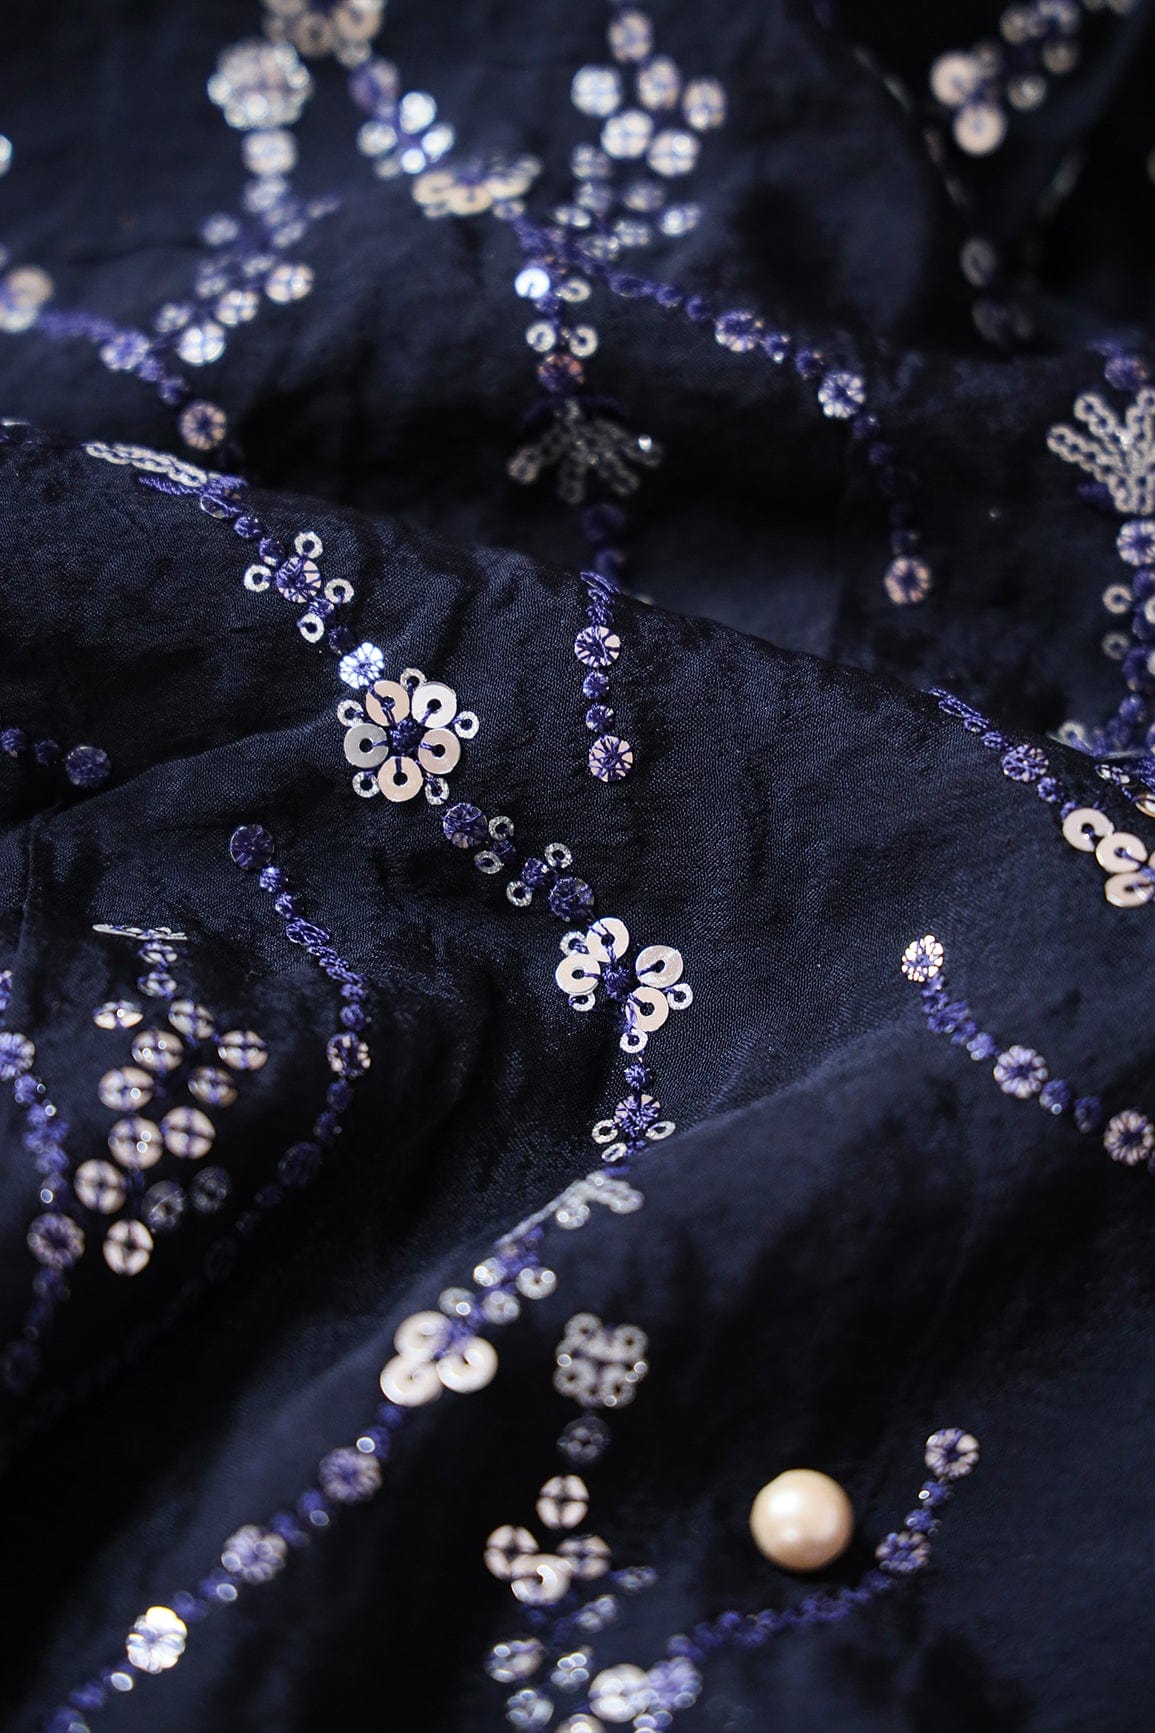 doeraa Embroidery Fabrics 4 Meter Cut Piece Of Silver Sequins With Navy Blue Thread Abstract Embroidery On Dark Navy Blue Soft Net Fabric